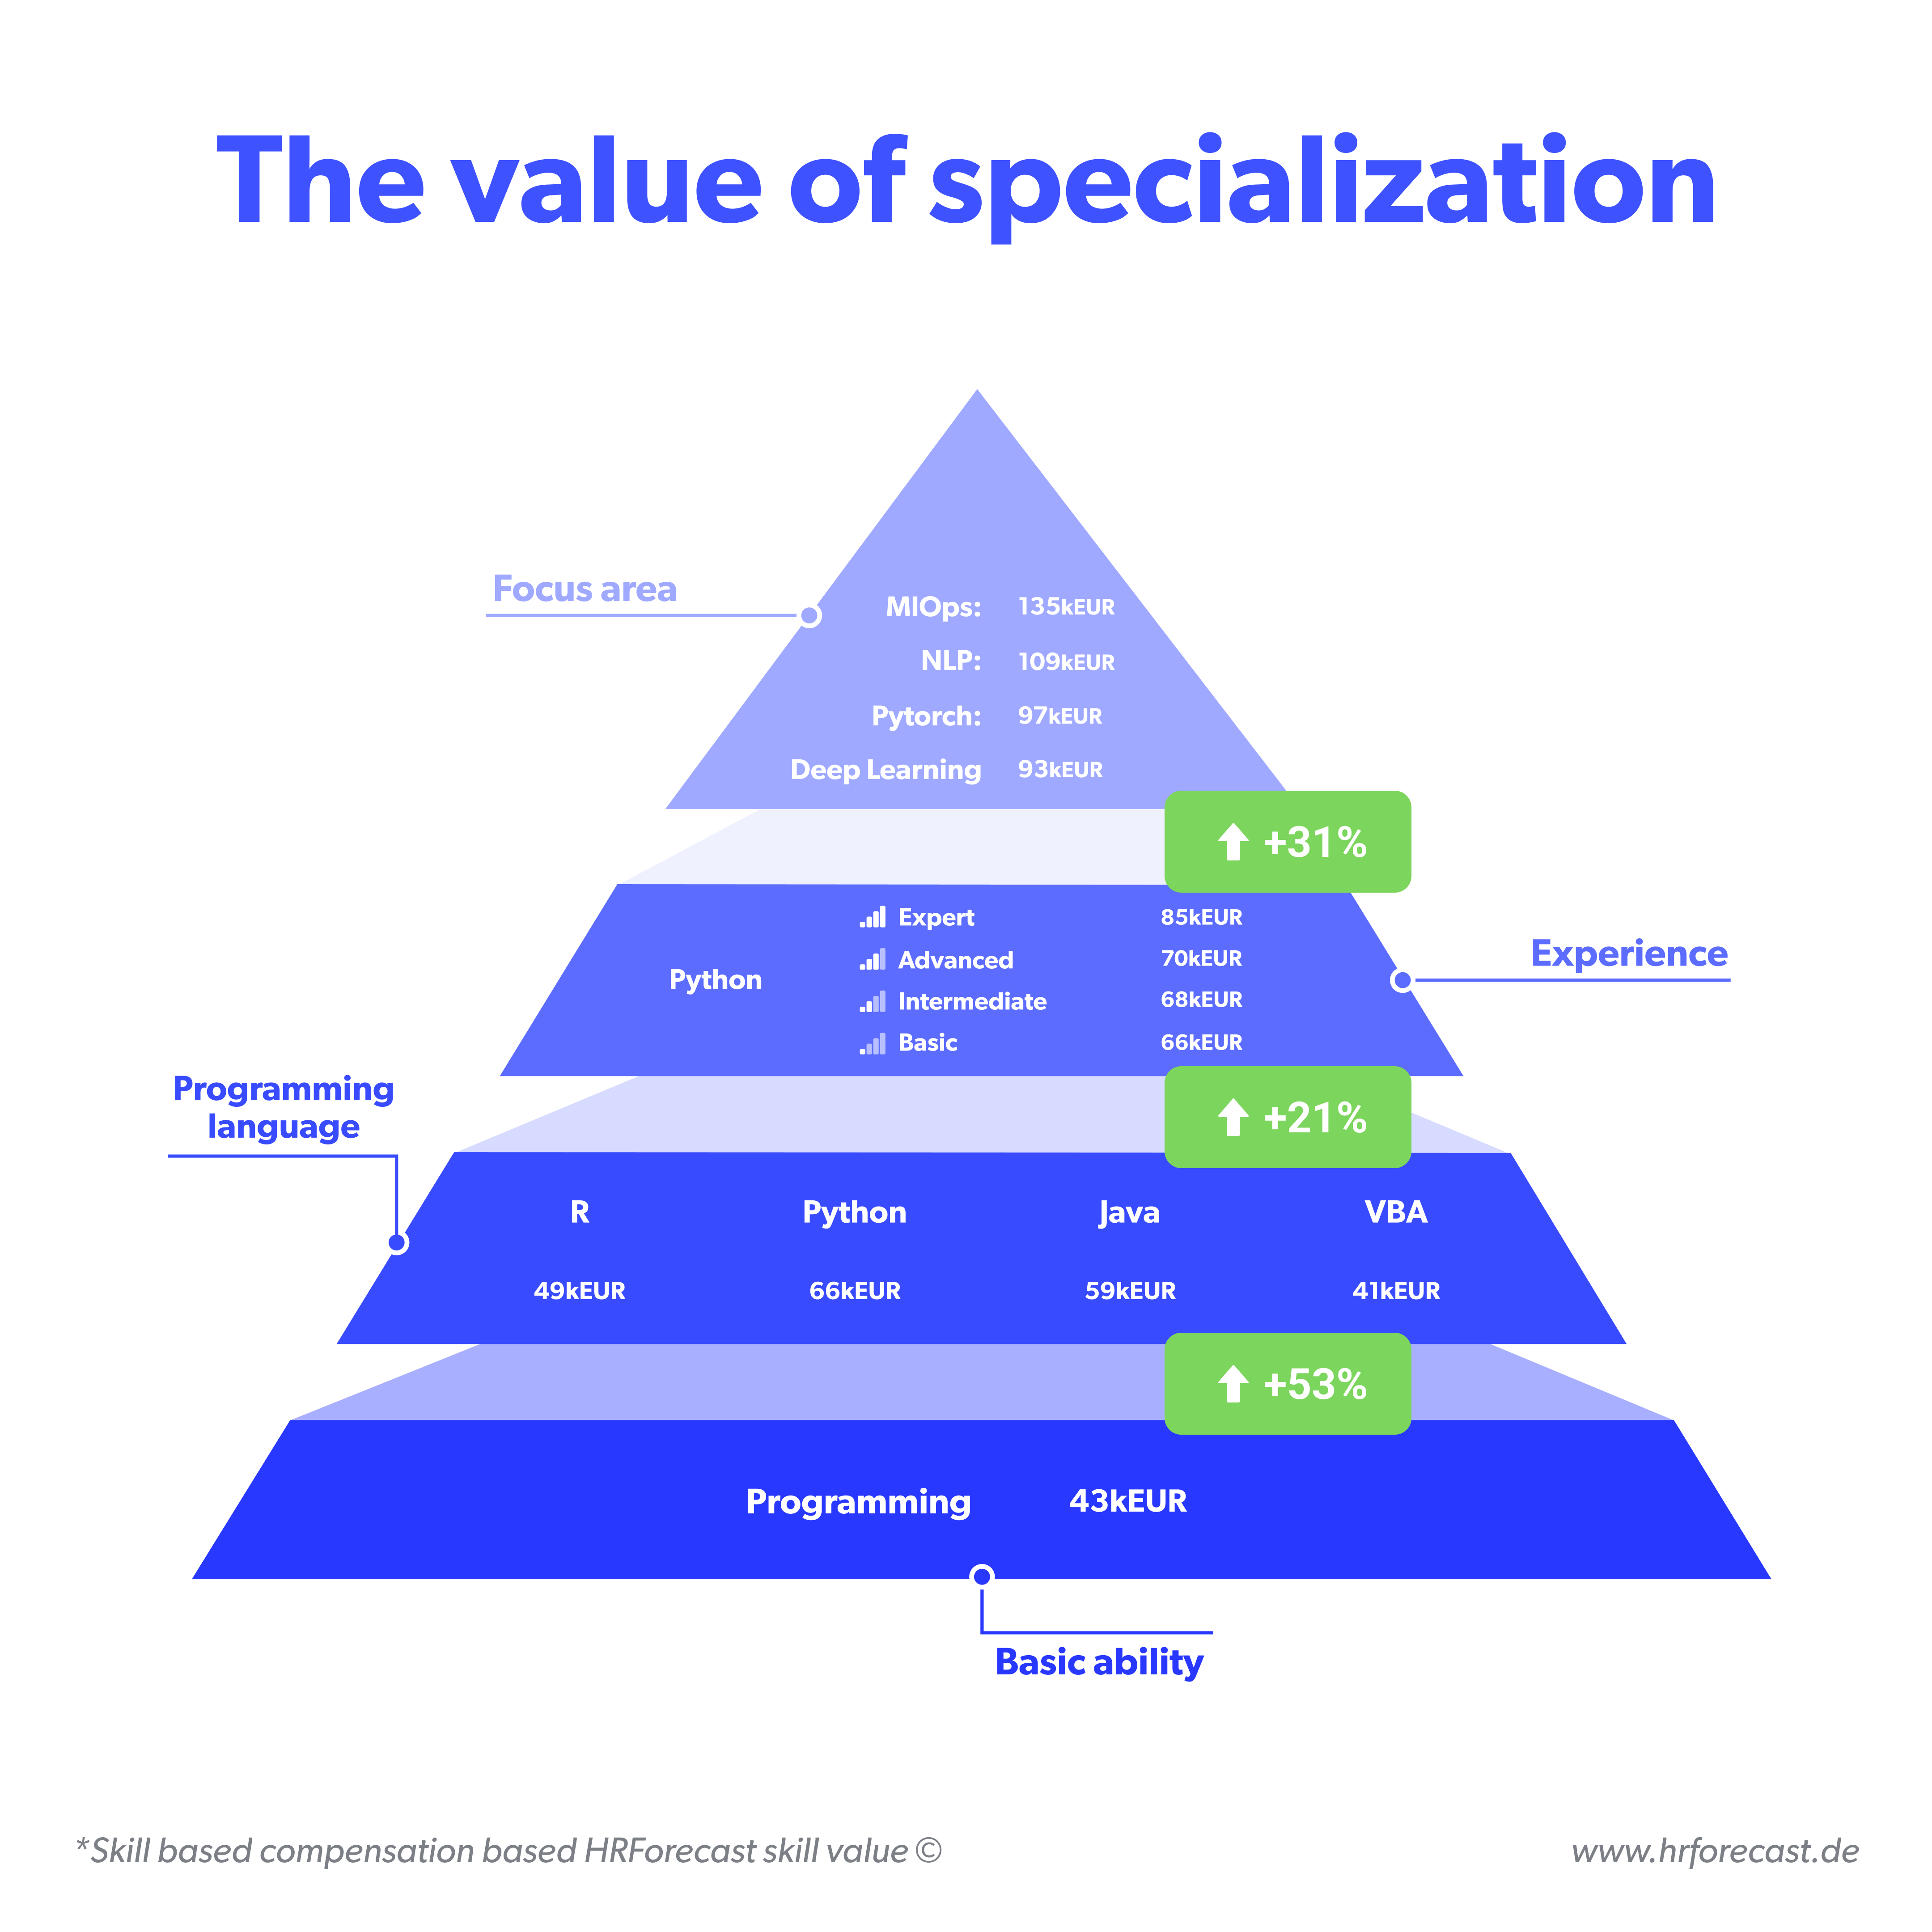 The value of specialization